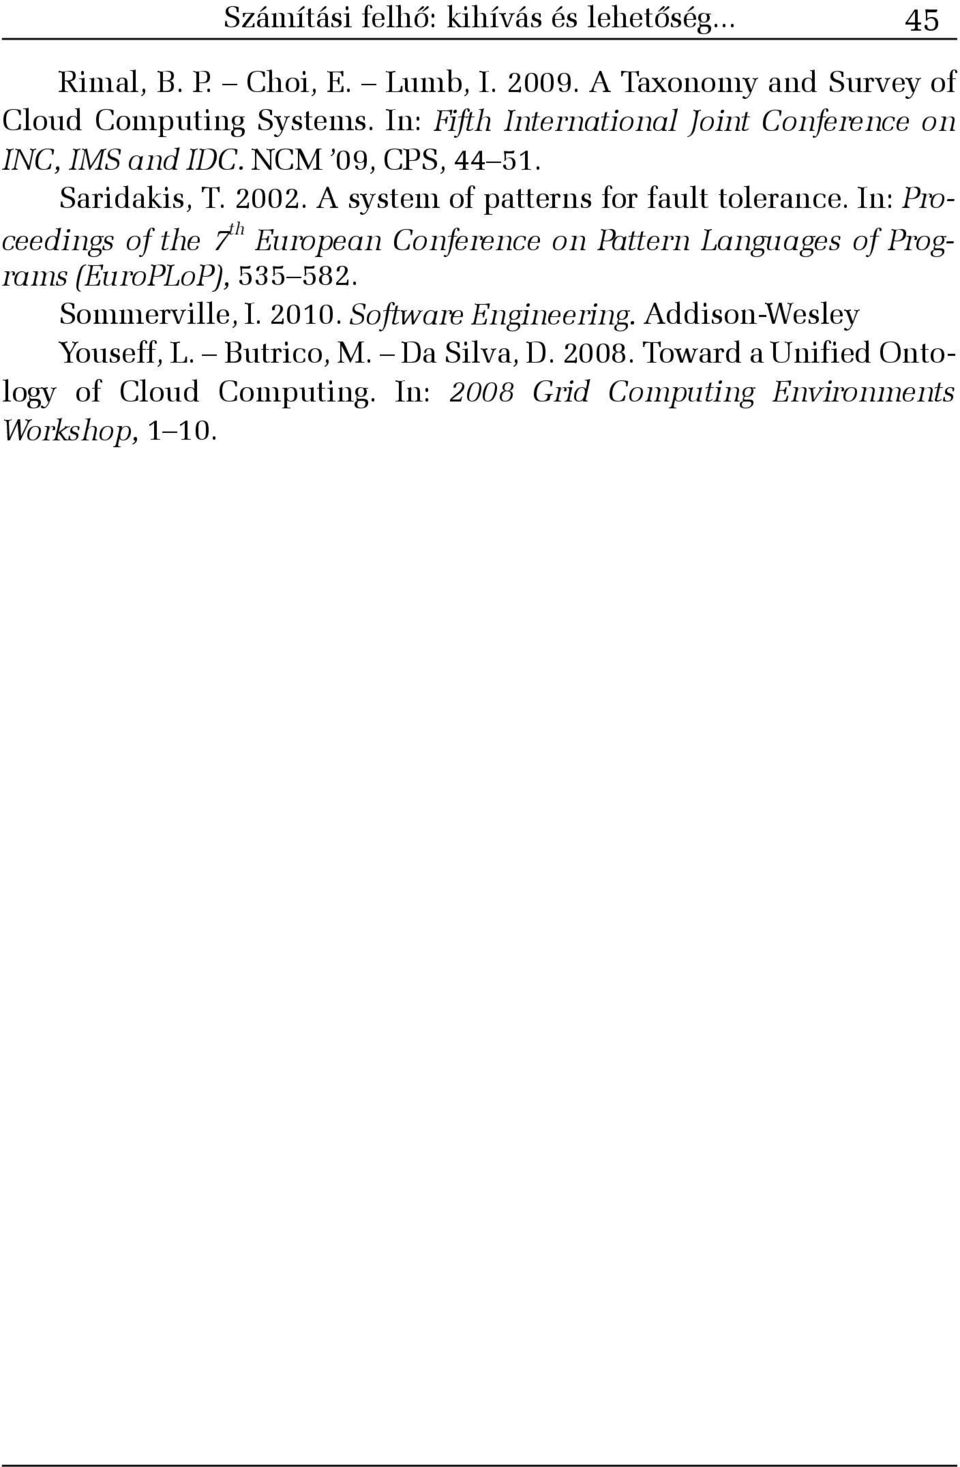 In: Proceedings of the 7 th European Conference on Pattern Languages of Programs (EuroPLoP), 535 582. Sommerville, I. 2010. Software Engineering.